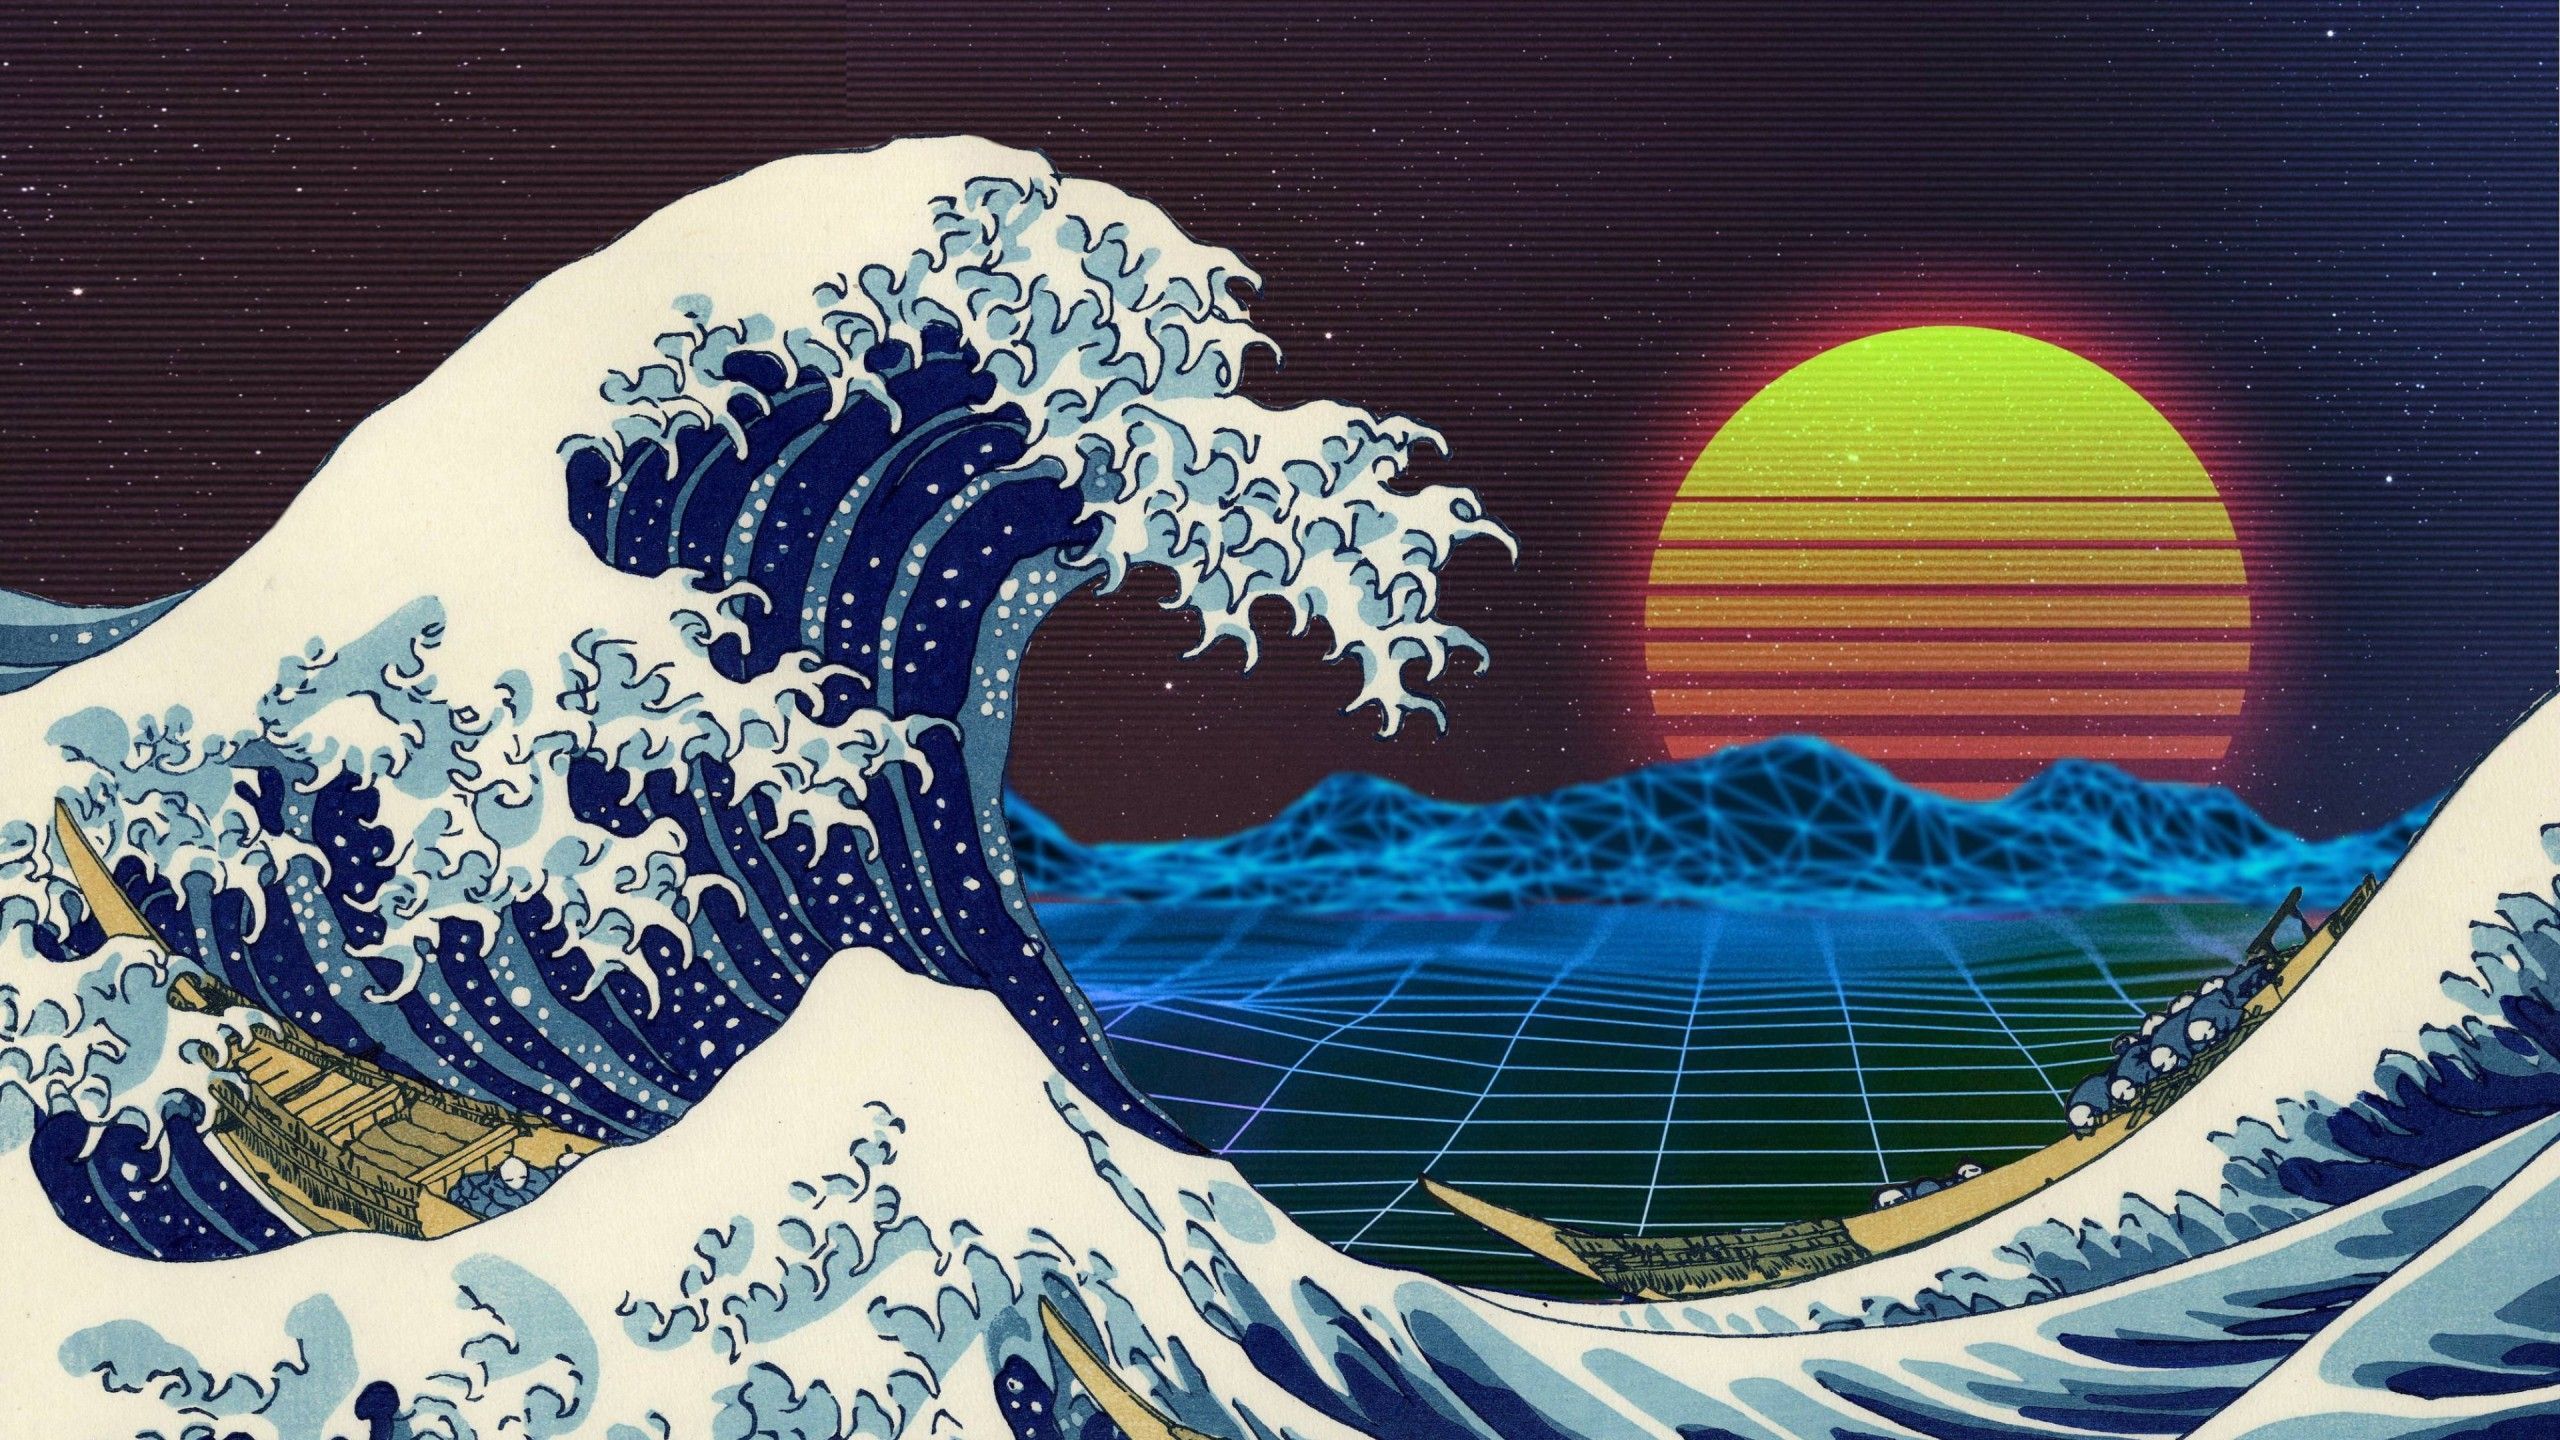 The Great Wave of Kanagawa, reimagined with a retro aesthetic - Dark vaporwave